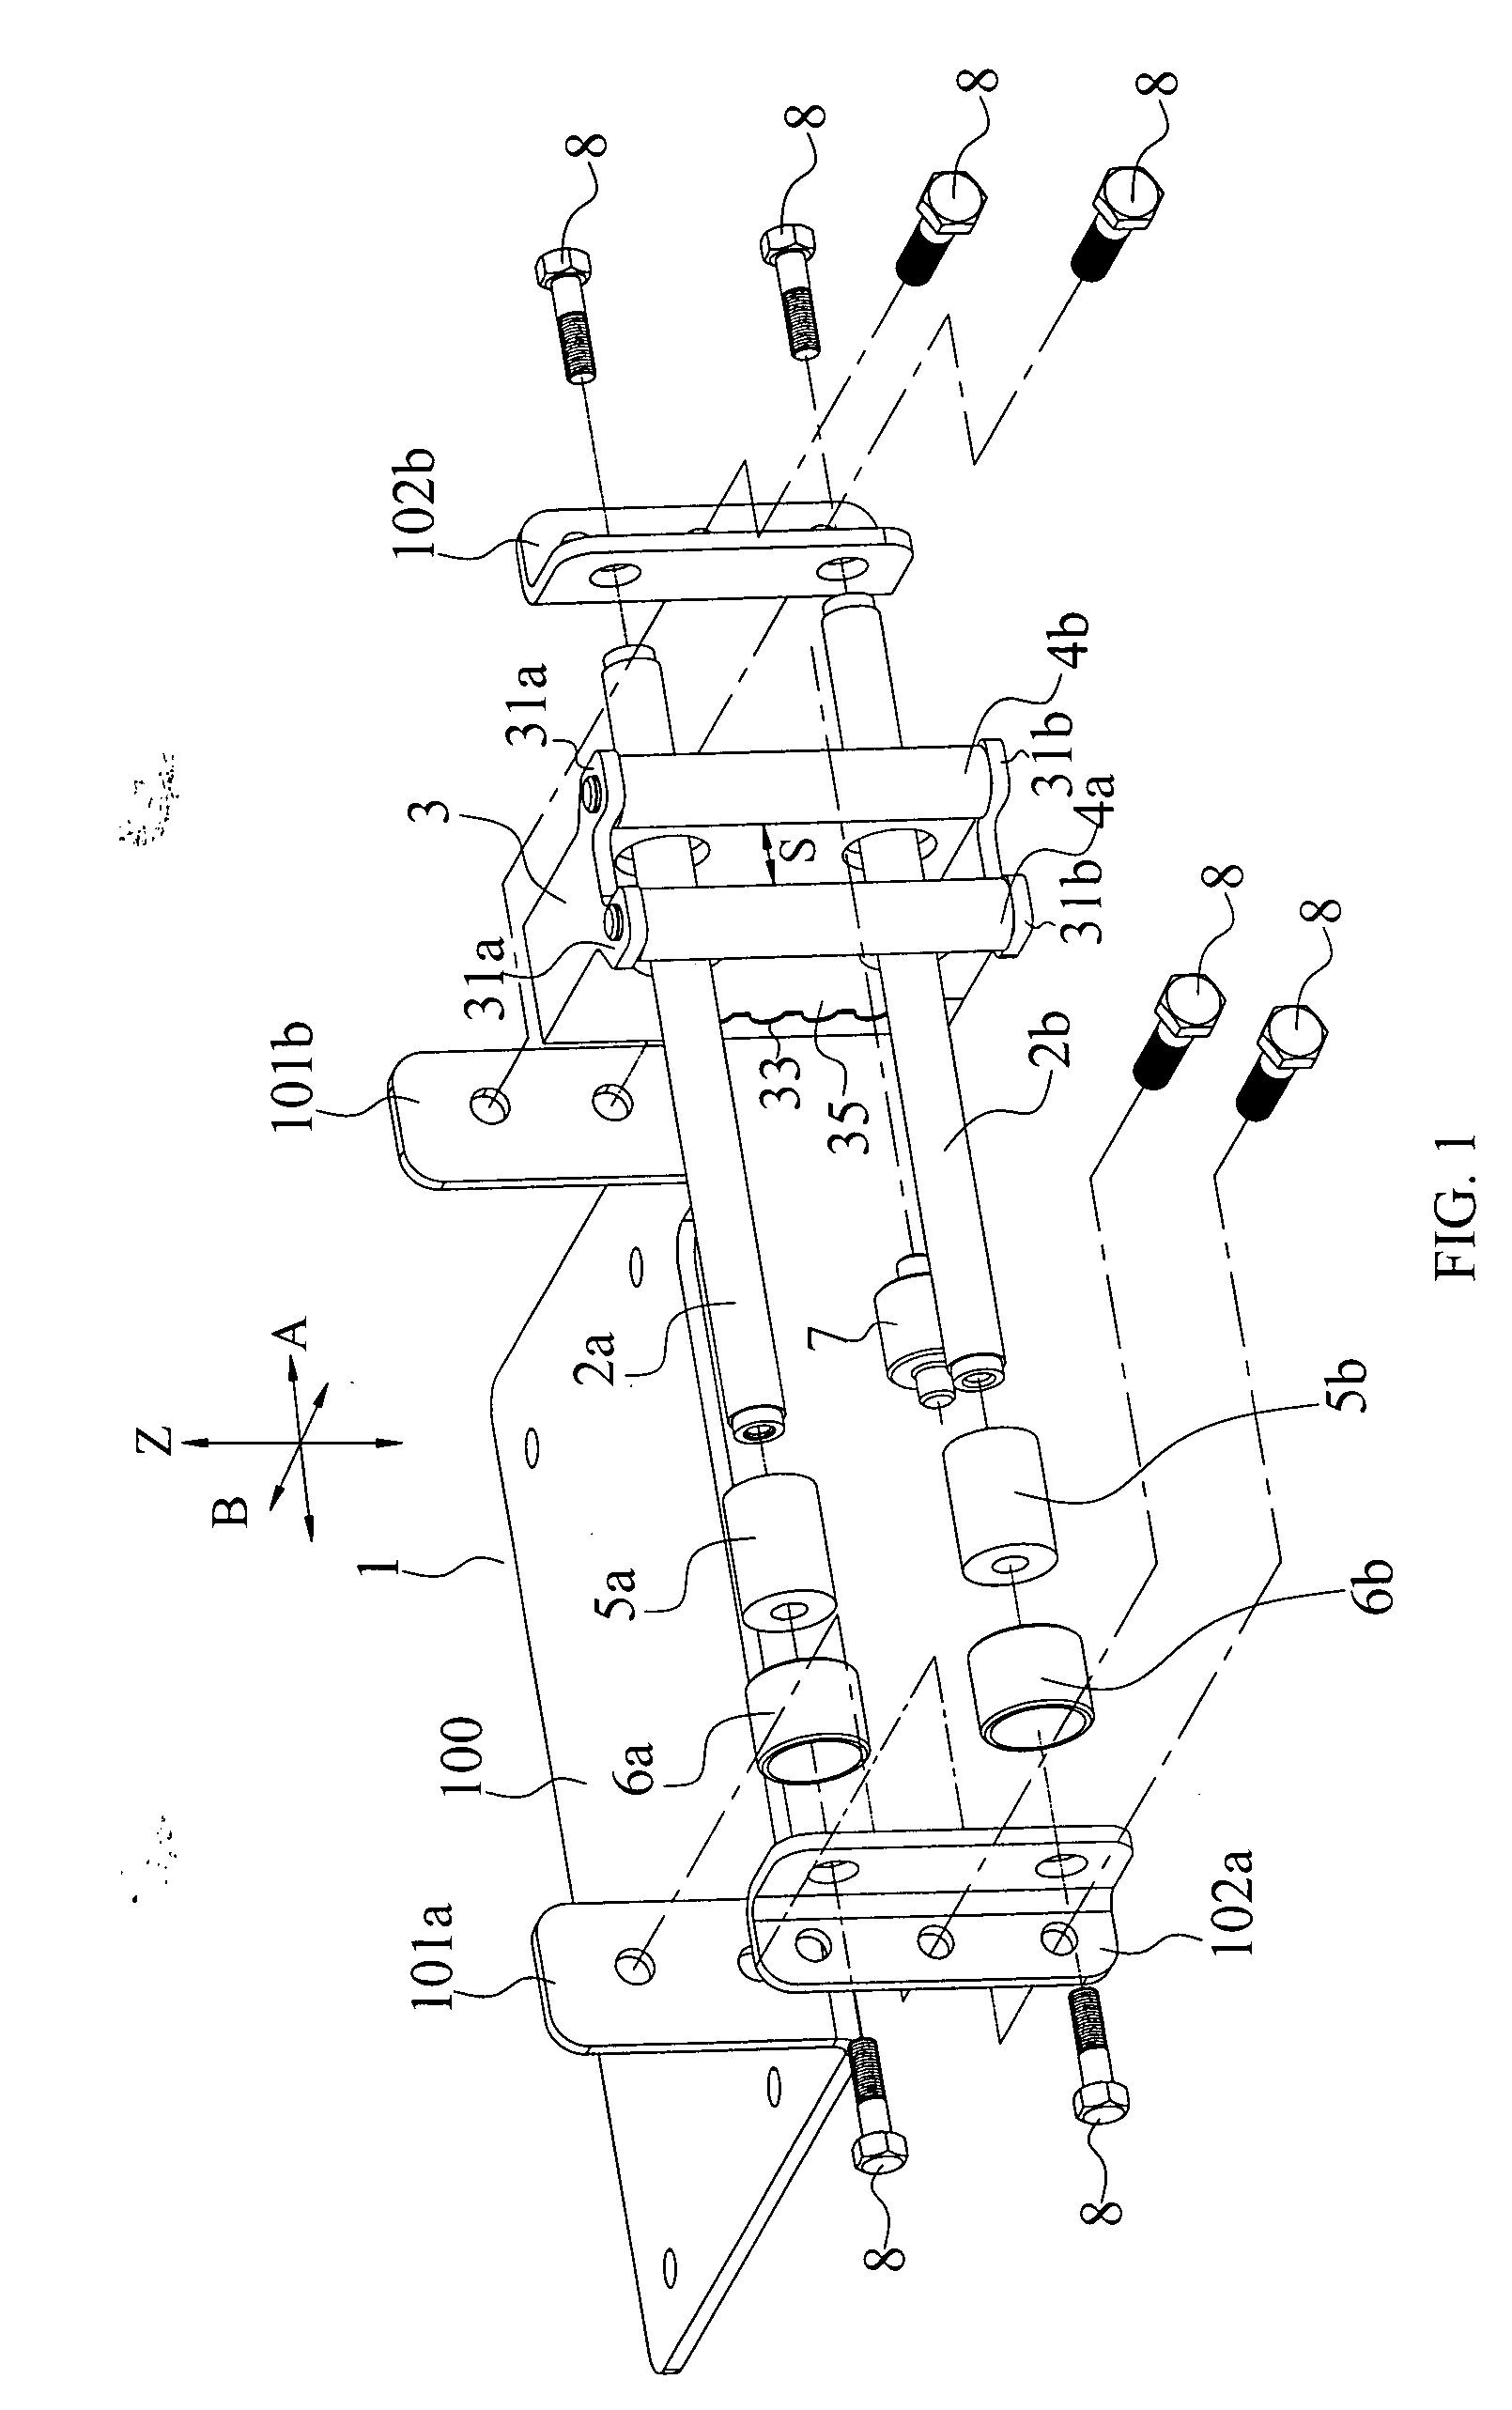 Cable guiding device